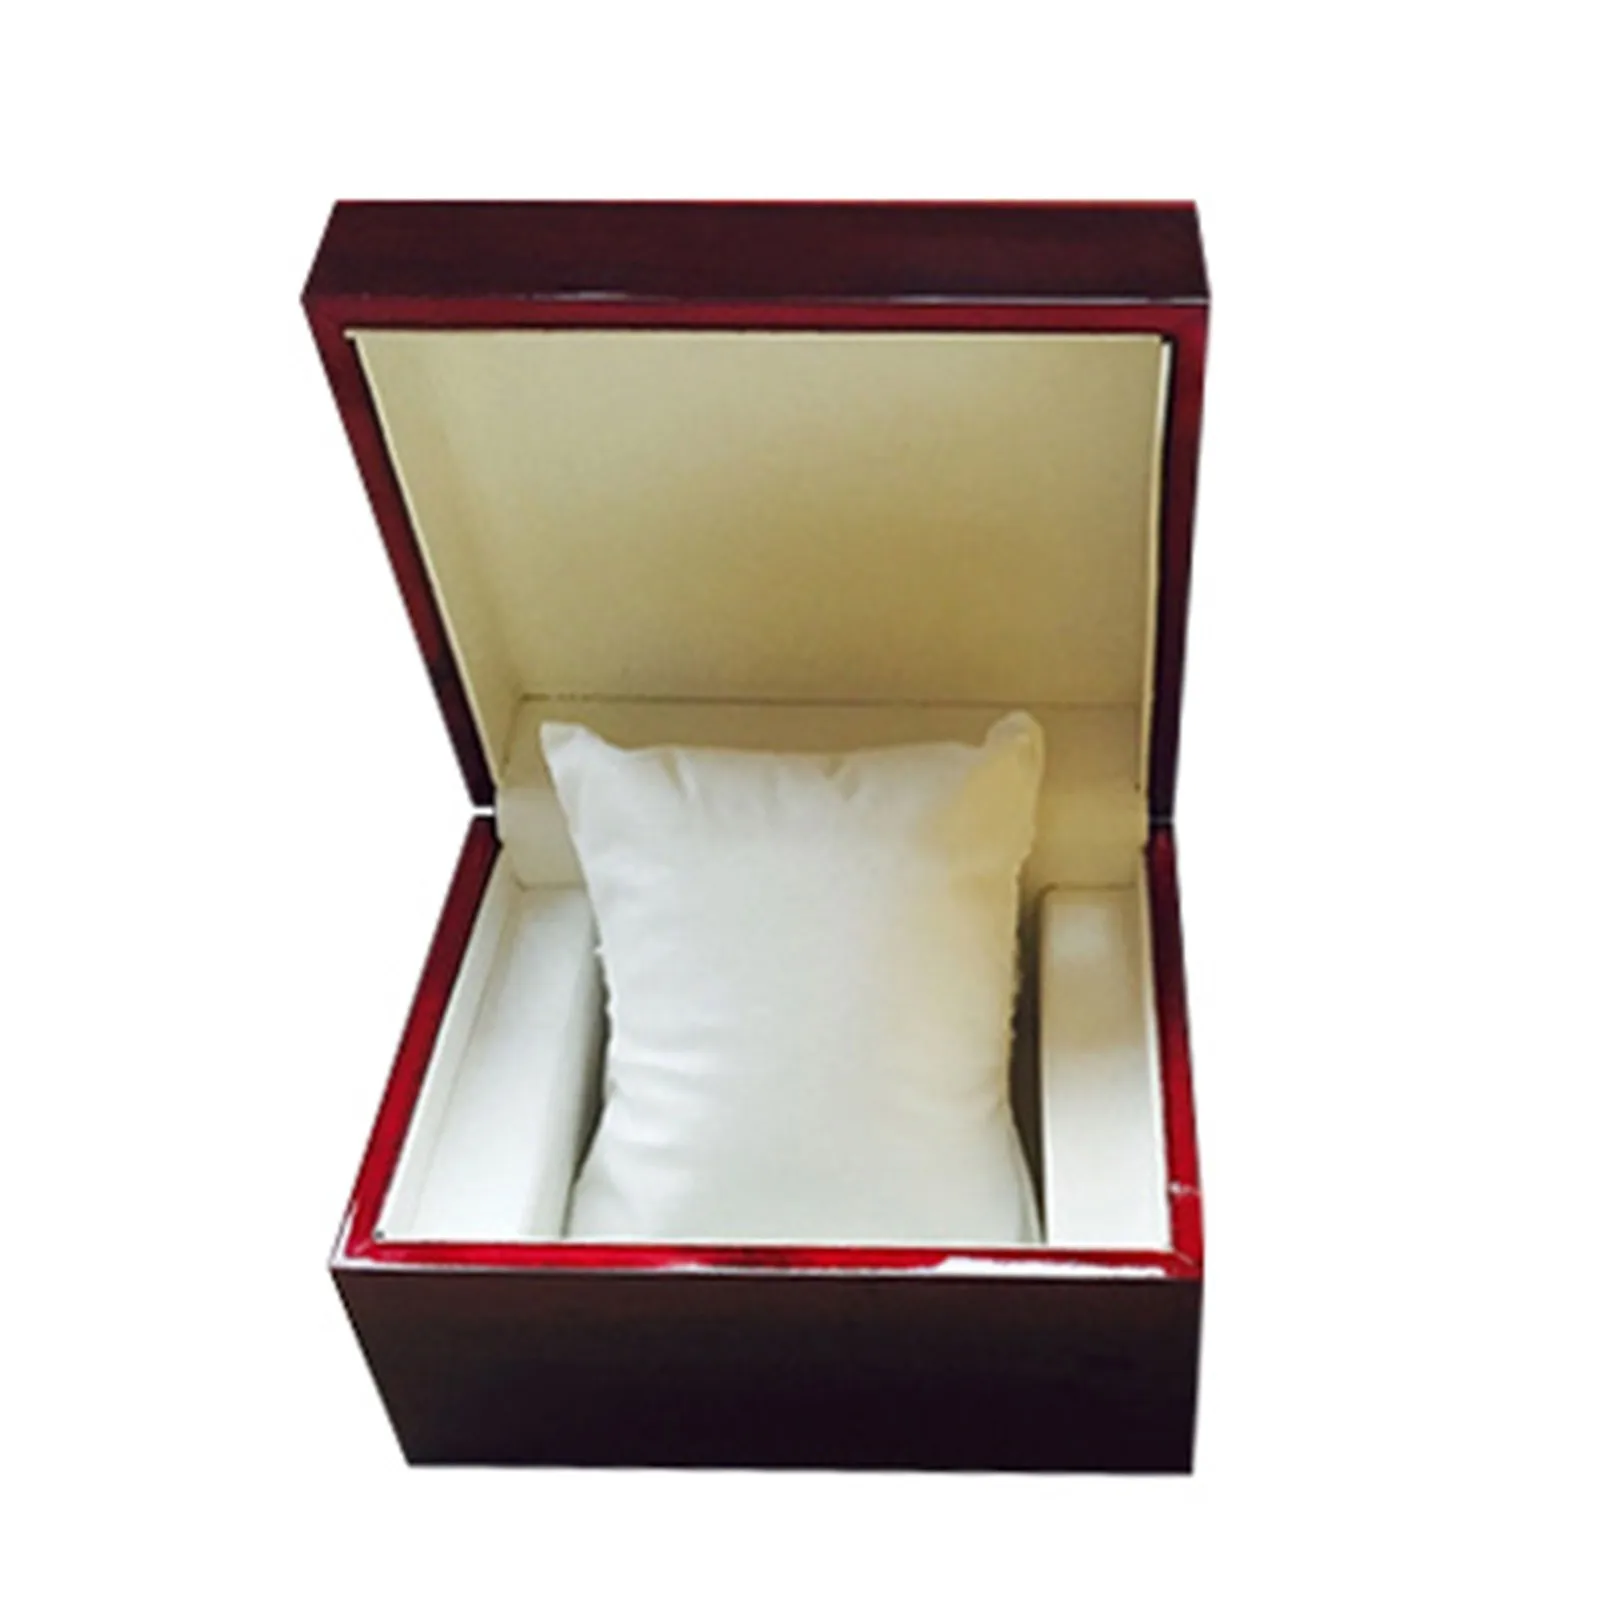 Buy MAXBELL 12 Slots Velvet Pillow Case For Jewelry Bracelet Wristwatch  Bangle No Lid Online at Low Prices in India  Amazon Jewellery Store   Amazonin